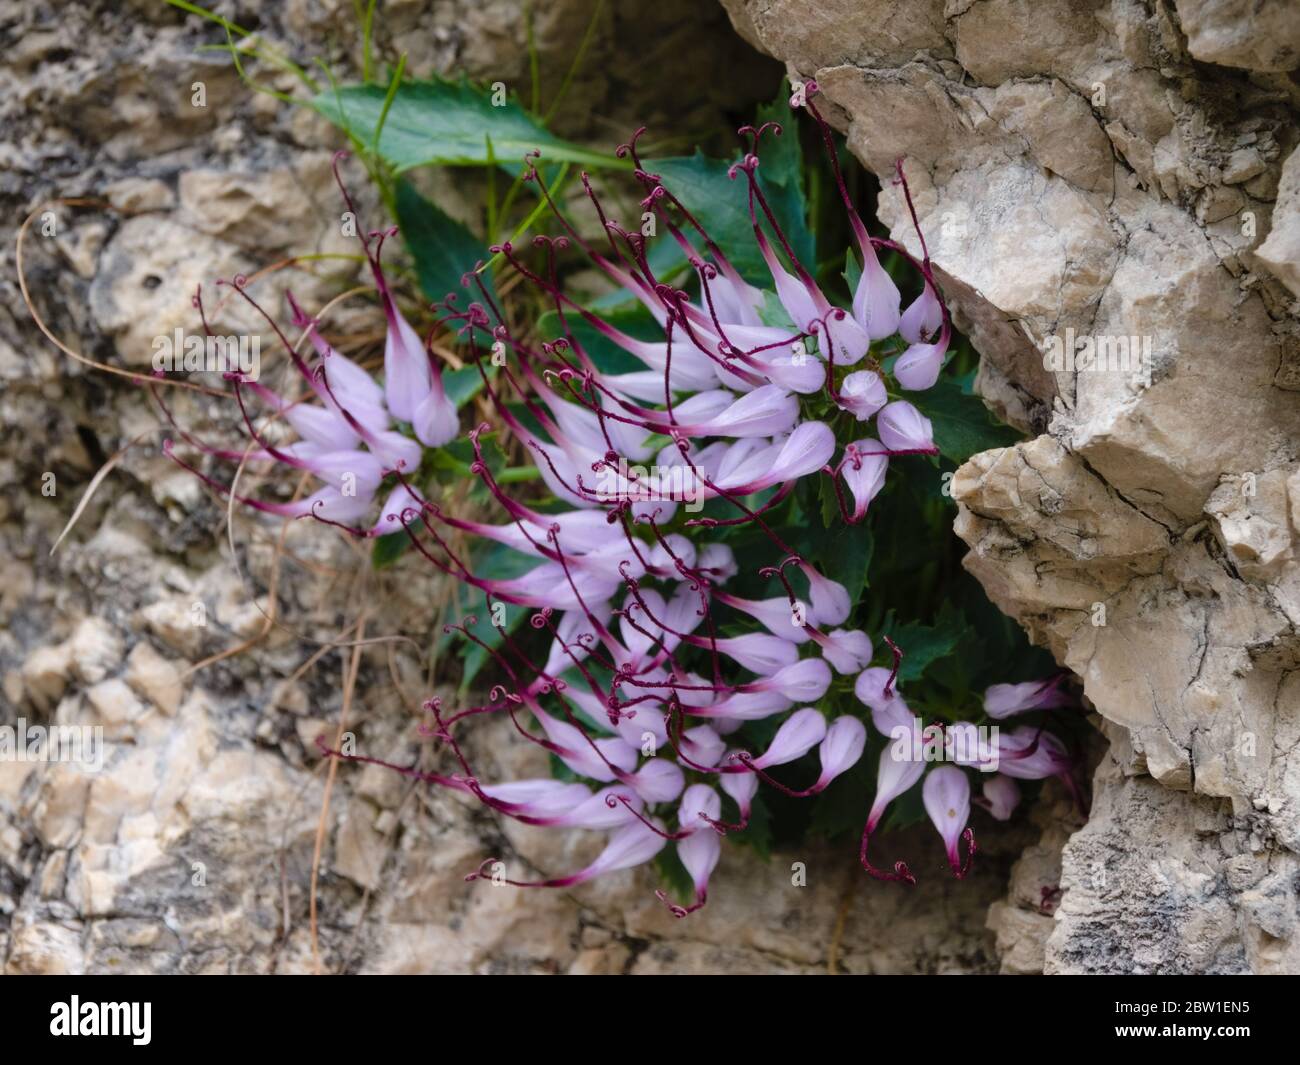 Clusters of Devil's Claw (Physoplexis comosa), a rare alpine plant in flower in the Italian Alps and Dolomiti area. Stock Photo